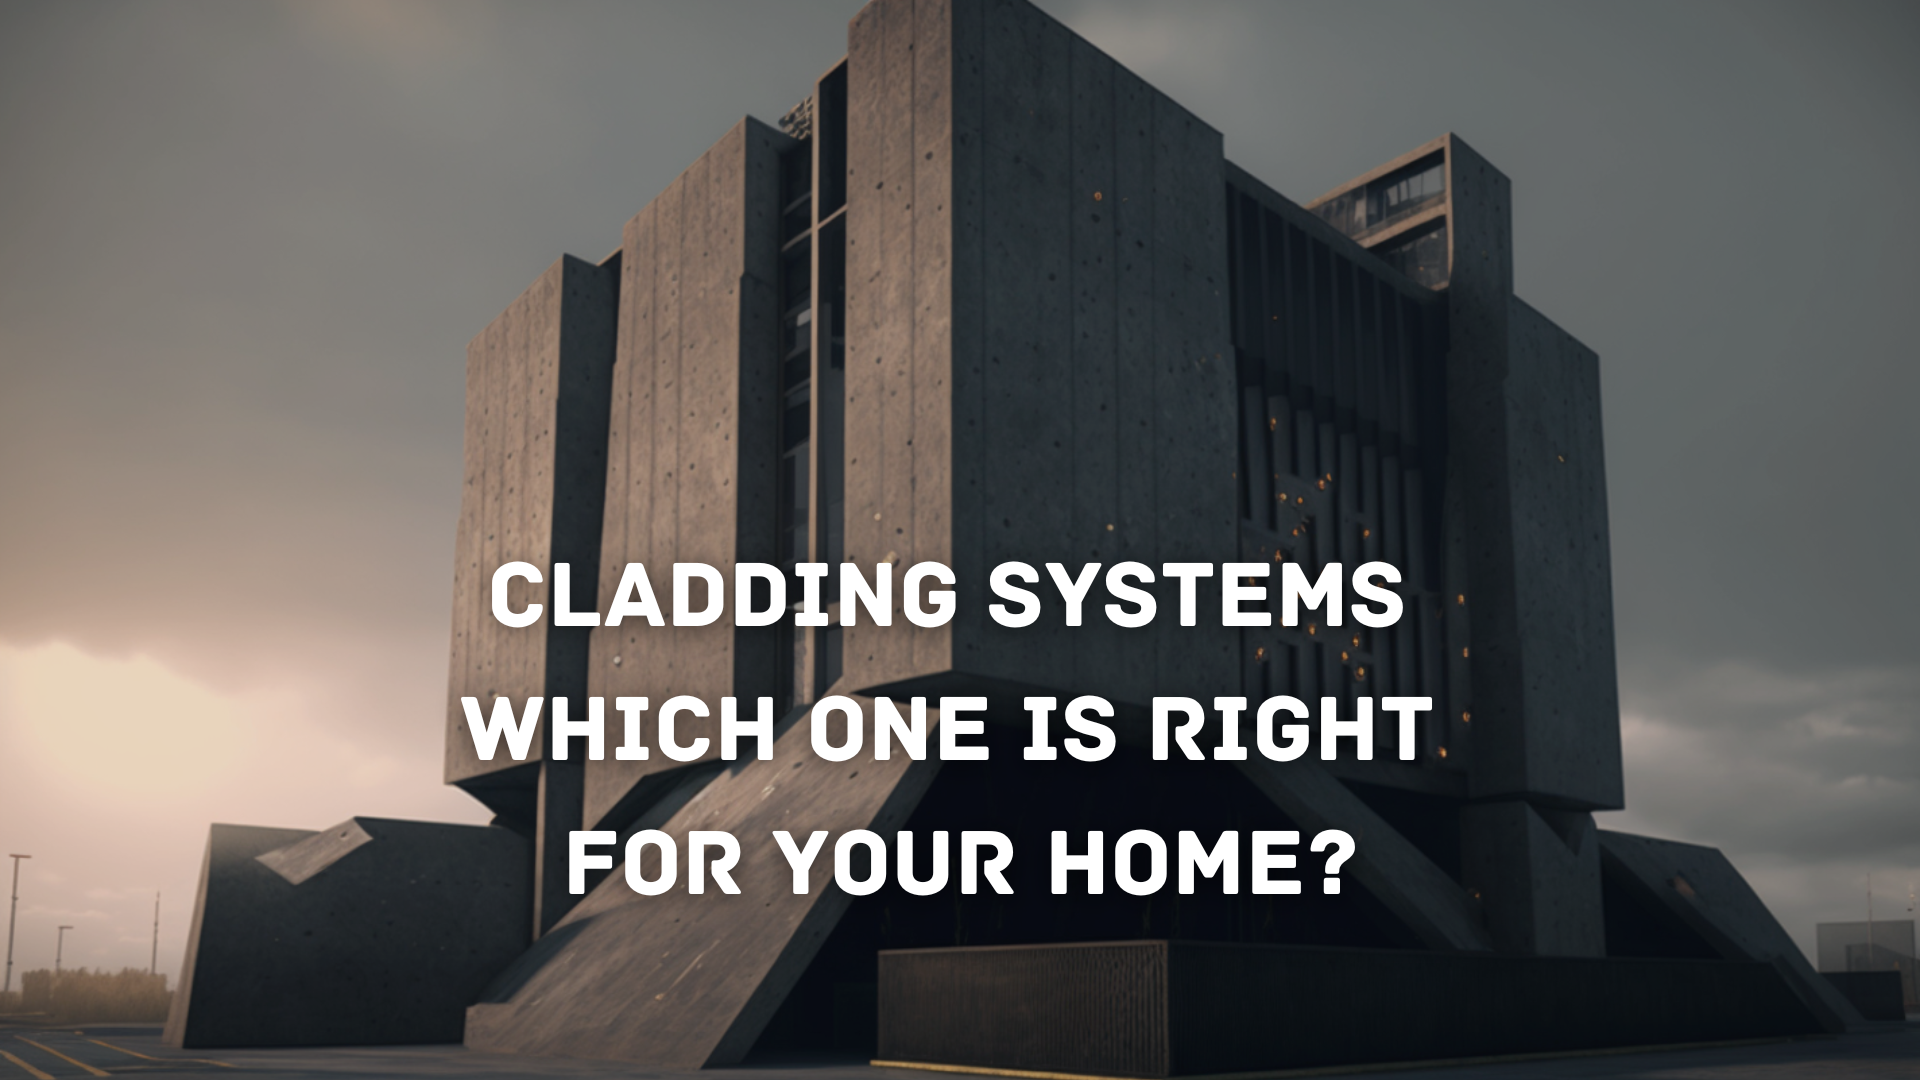 Cladding Systems: Which One Is Right for Your Home?